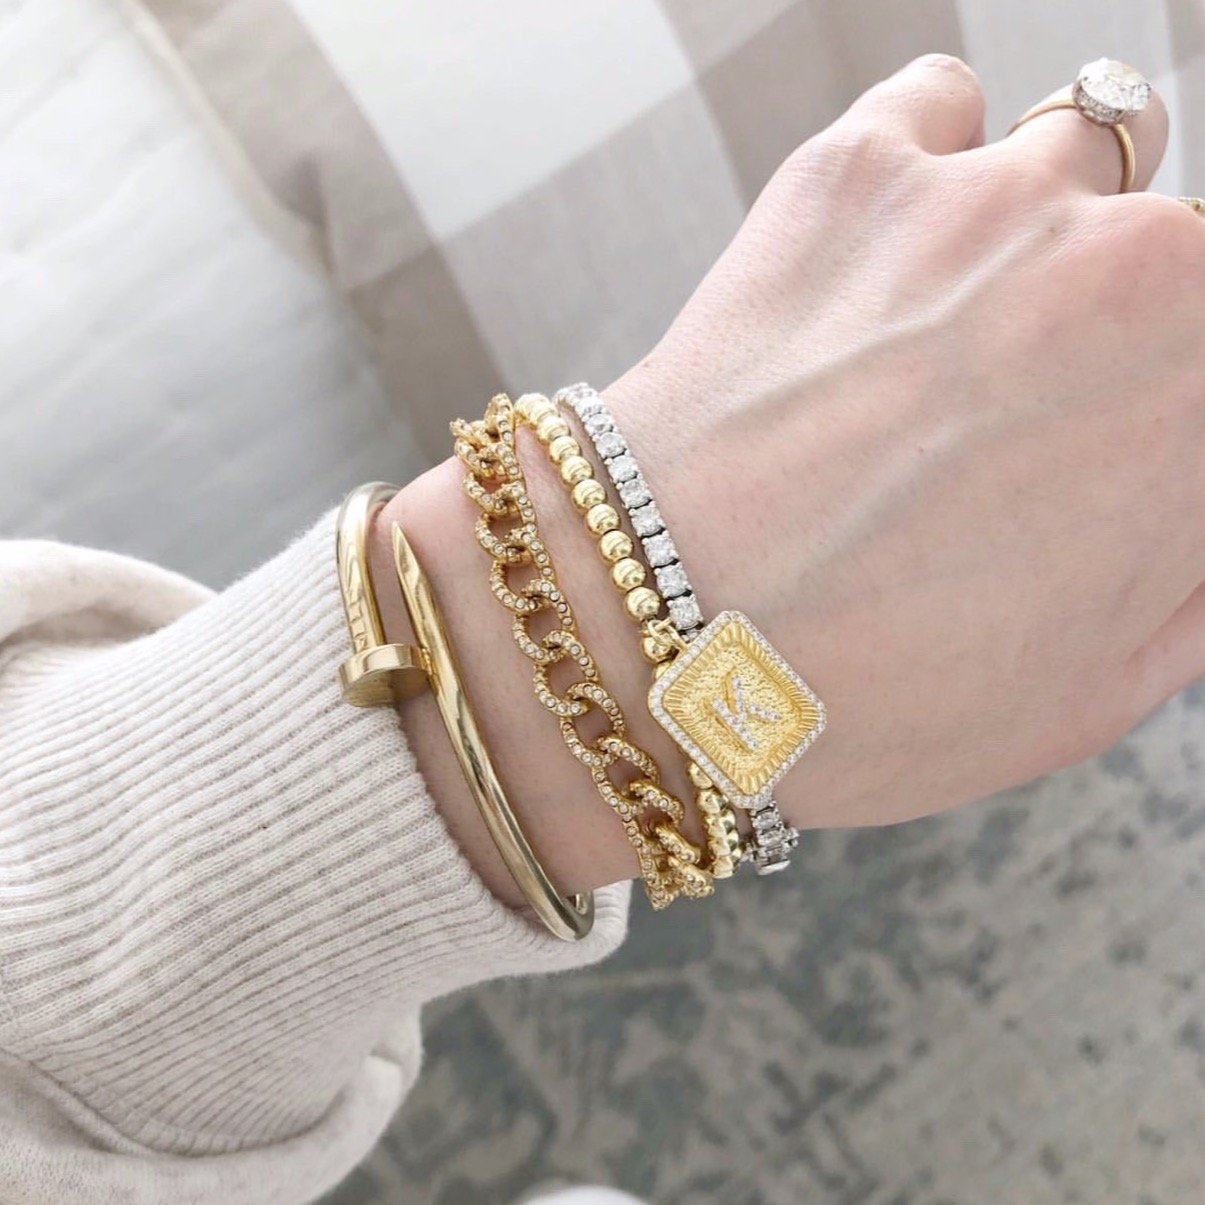 Square Initial Bracelet in Gold JEWELRY The Sis Kiss